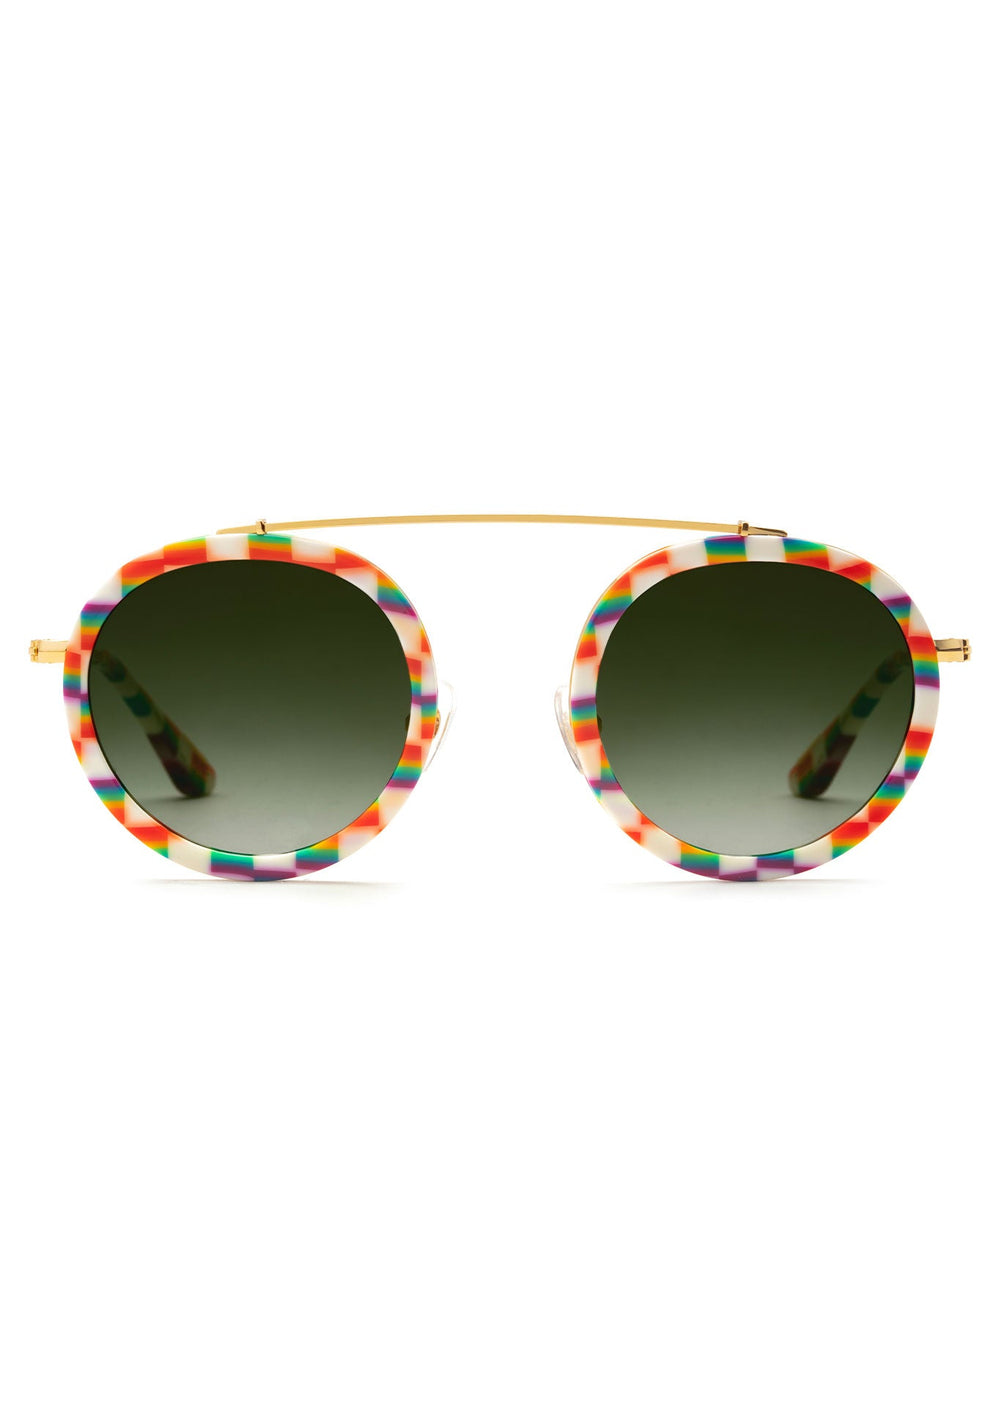 KREWE SUNGLASSES - CONTI | Amore 18K Handcrafted, rainbow checkered acetate limited addition gay pride collection sunglasses.